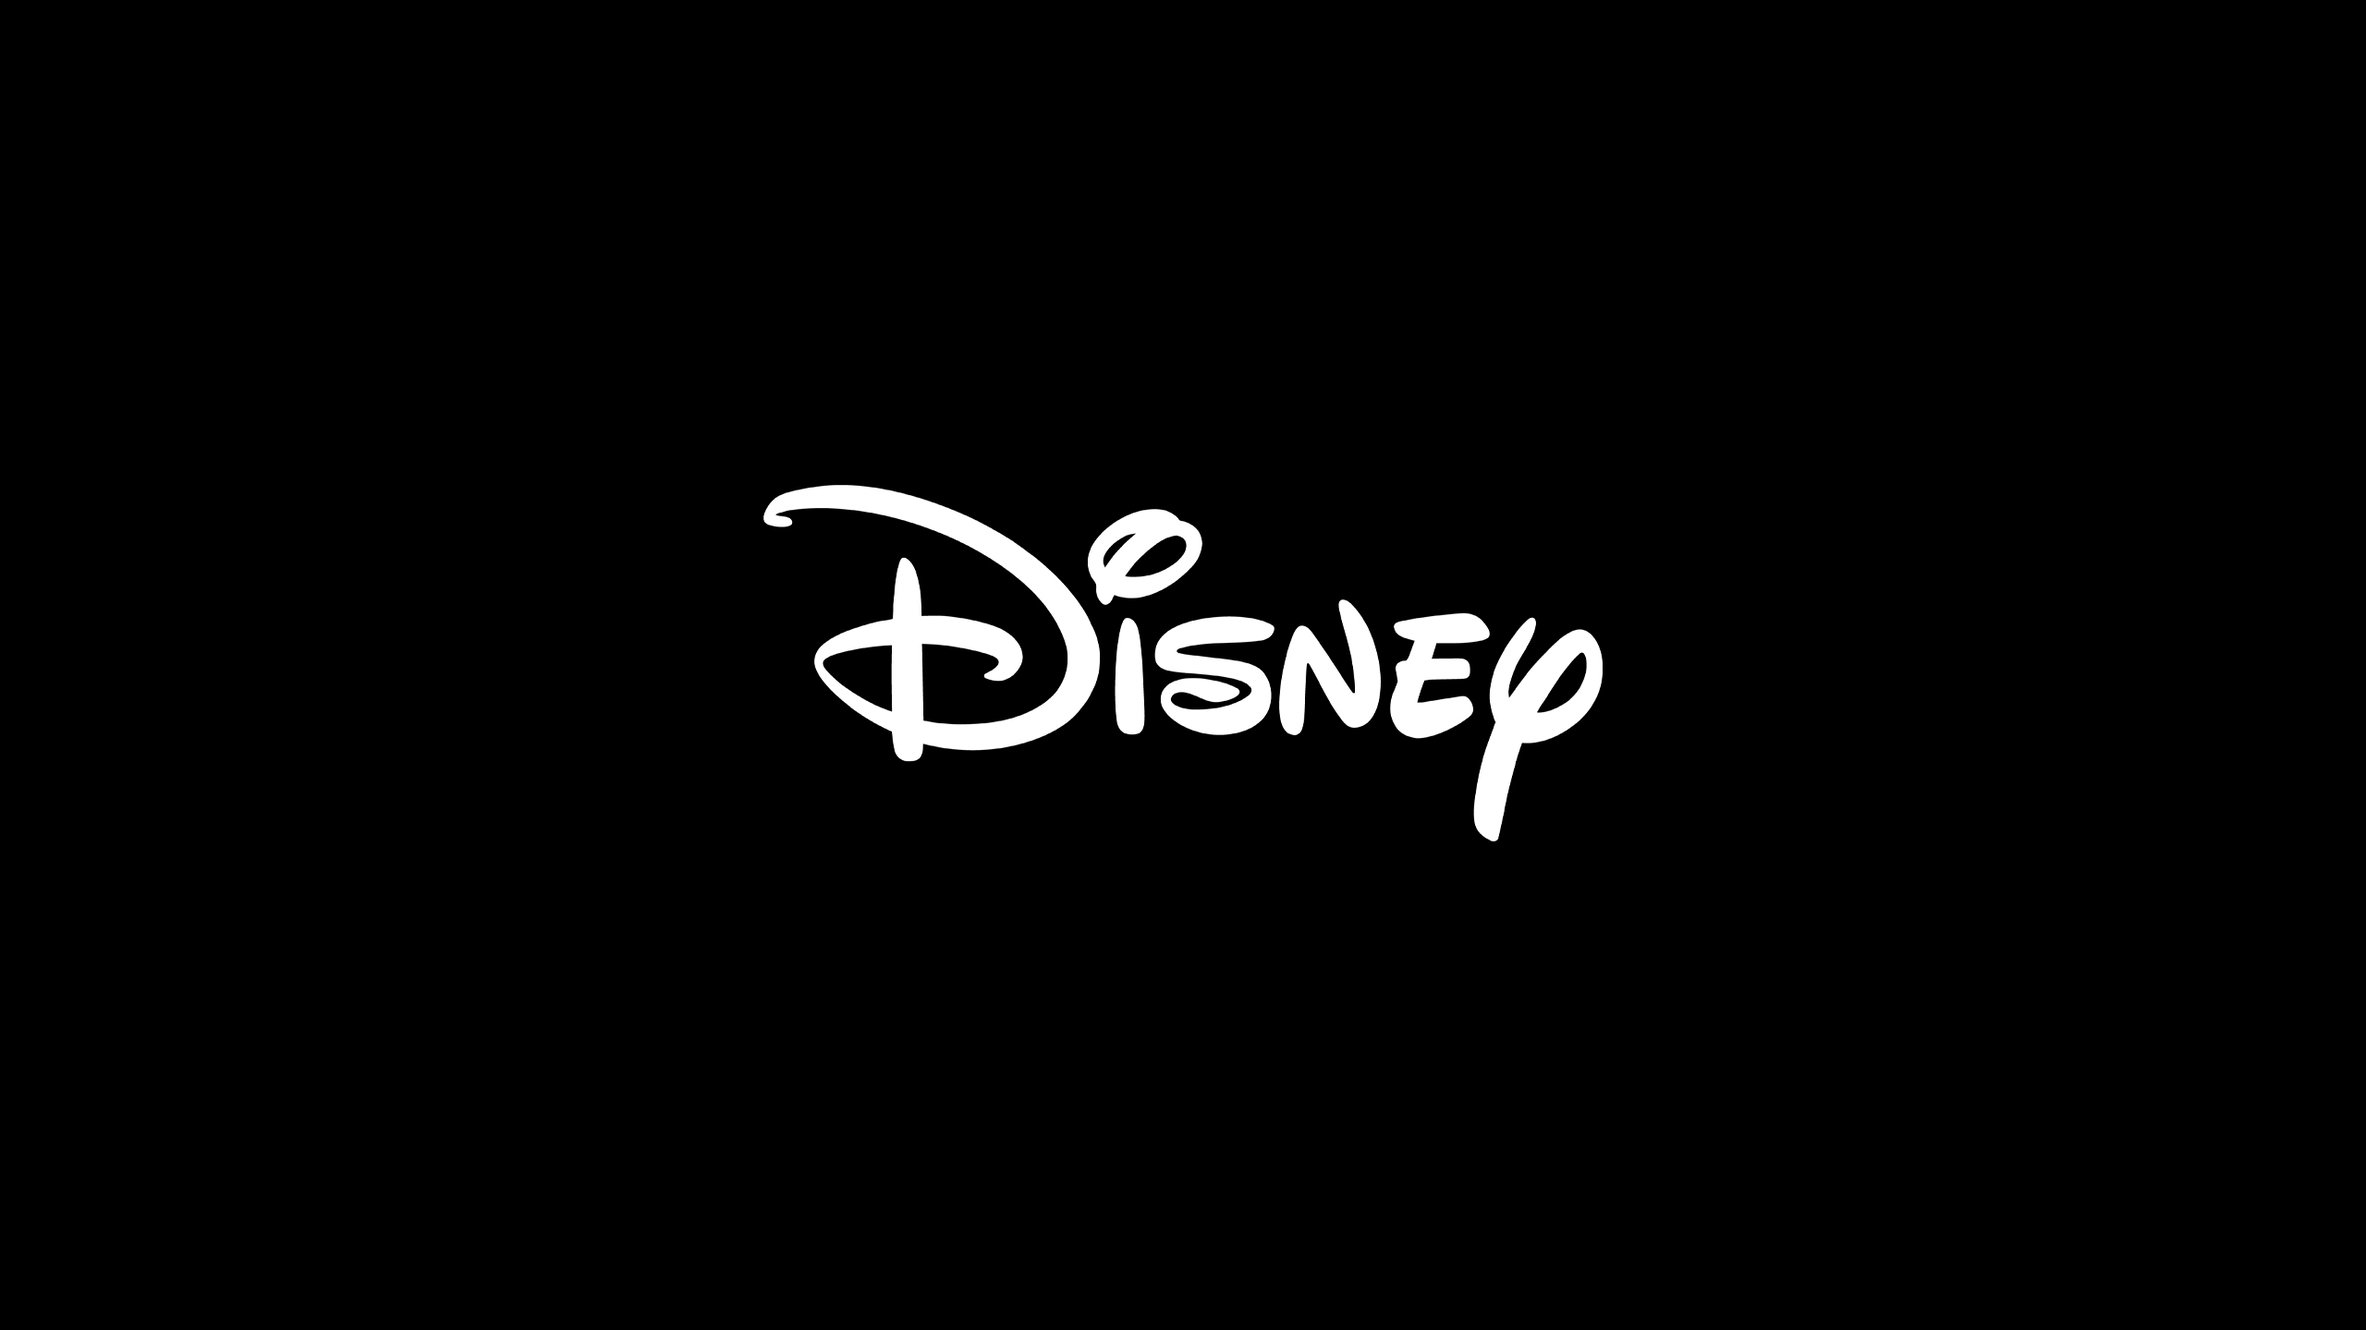 Casting Families For A Disney Parks Commercial!